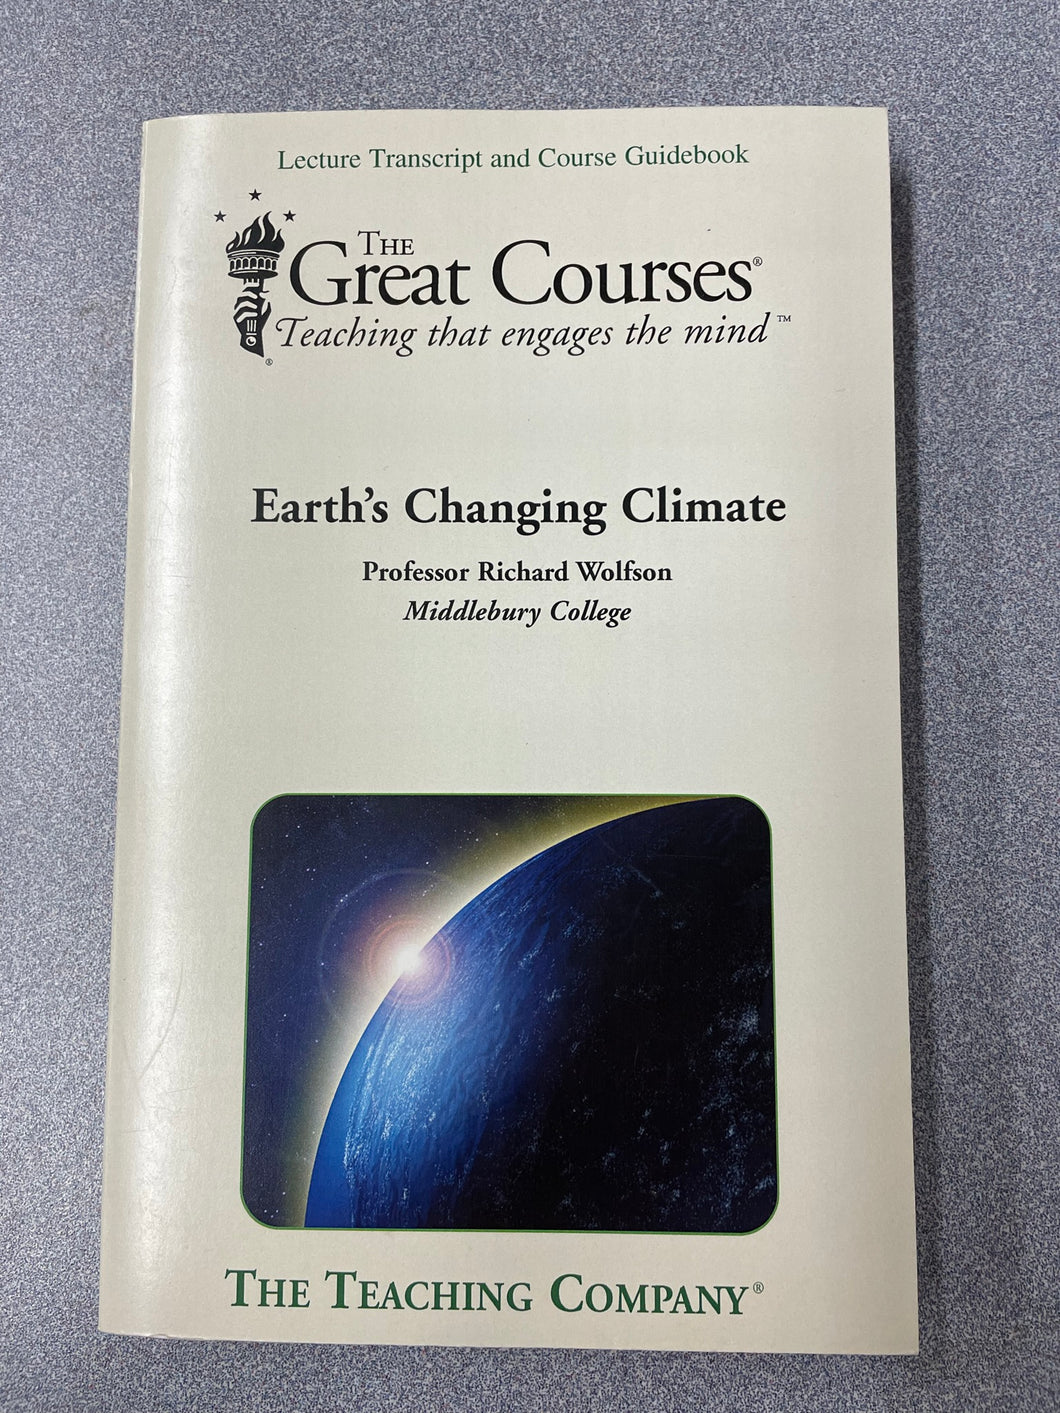 Earth's Changing Climate, Lecture Transcript and Course Guidebook,  Wolfson, Richard  [2007] GC 12/22